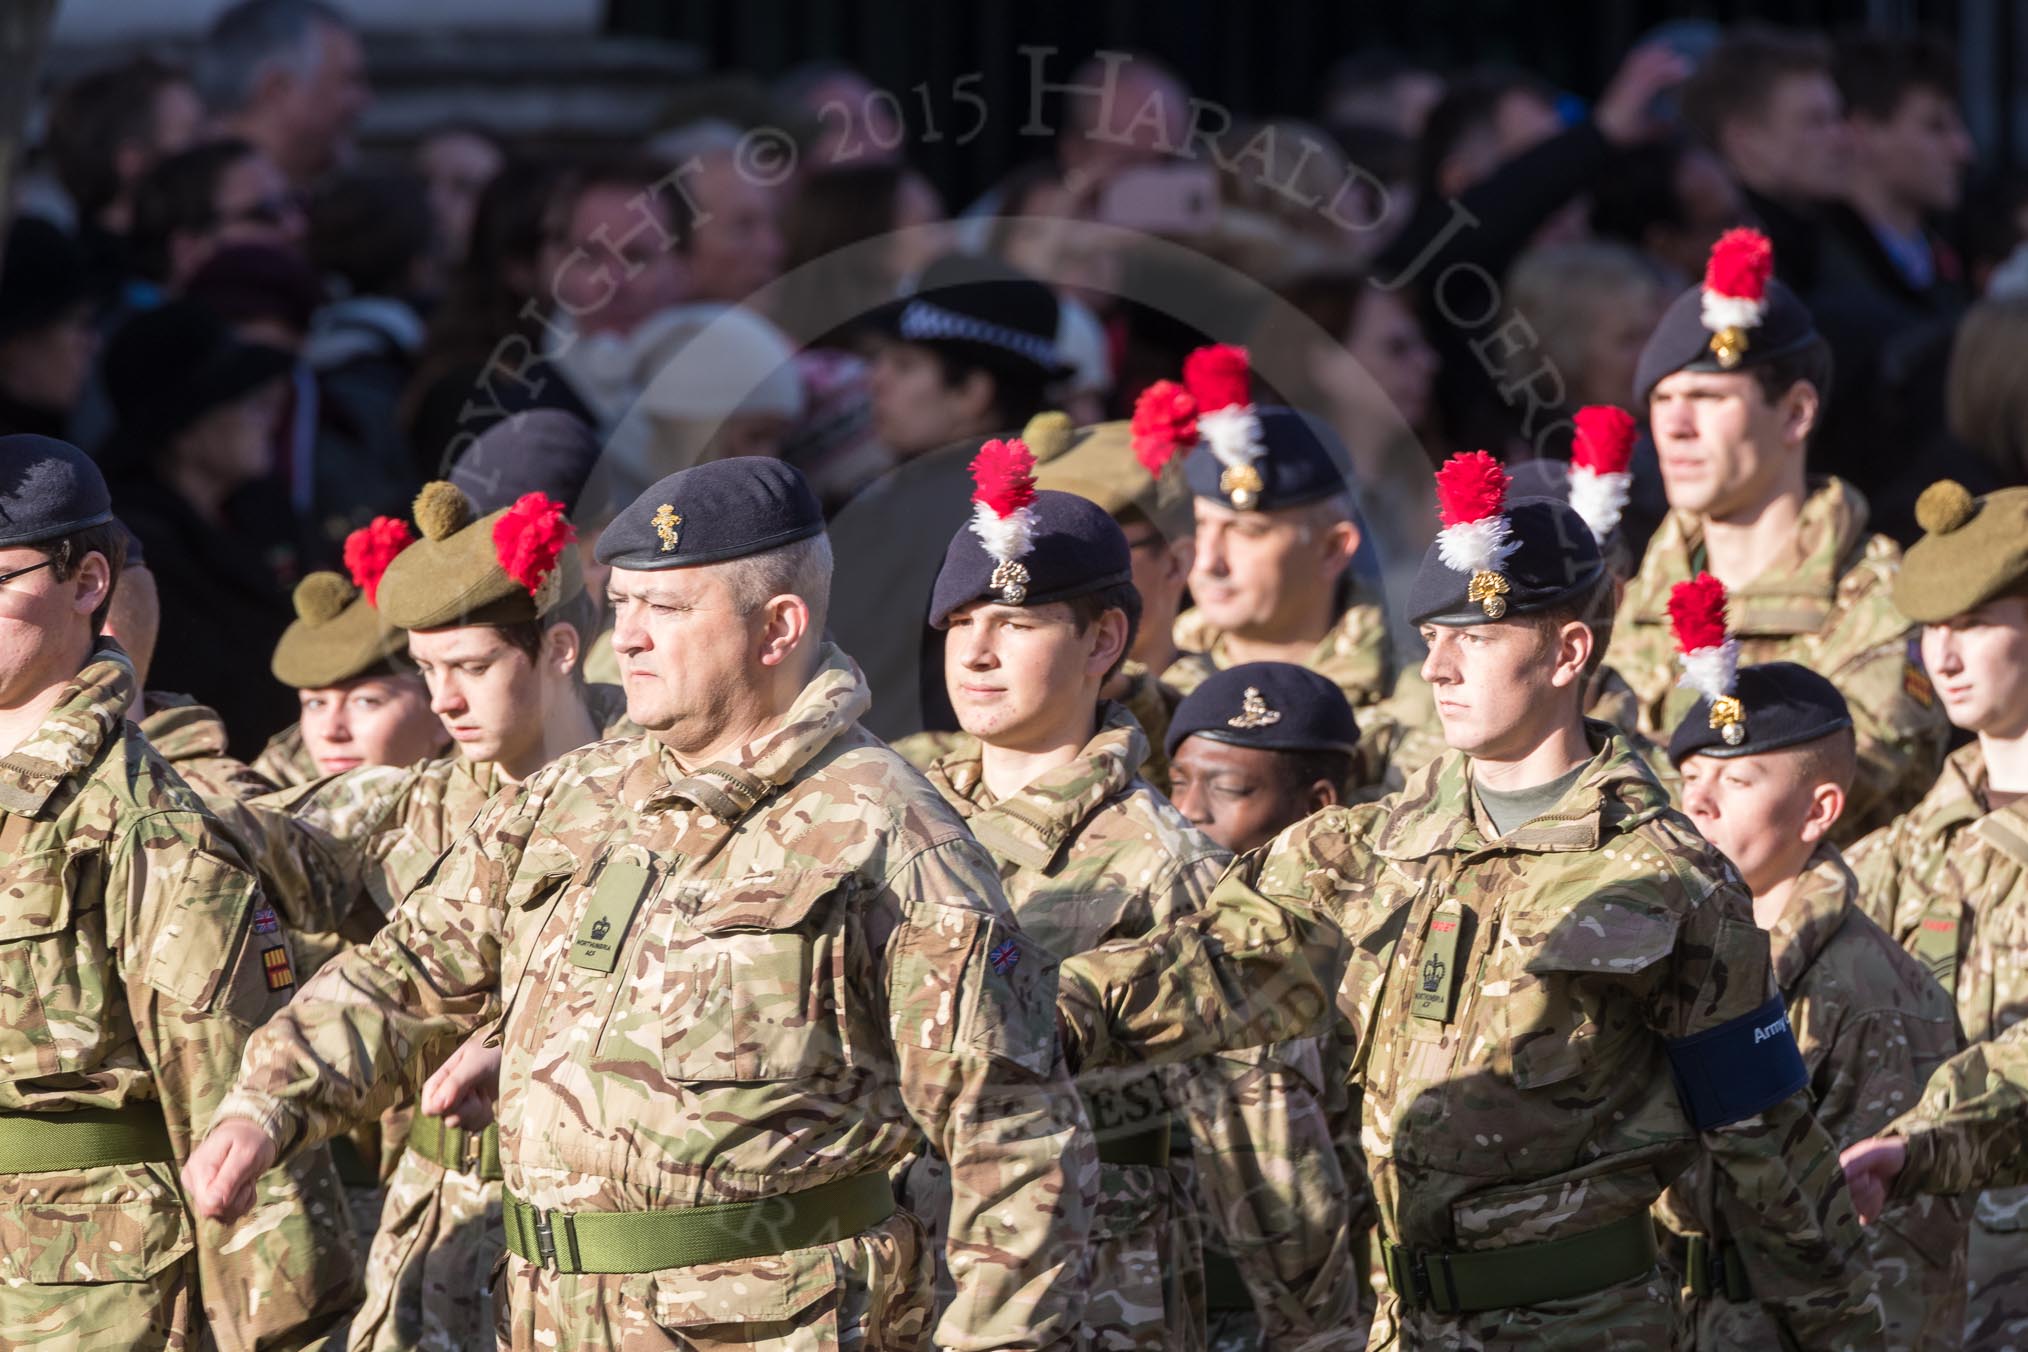 March Past, Remembrance Sunday at the Cenotaph 2016: M32 Army and combined Cadet Force.
Cenotaph, Whitehall, London SW1,
London,
Greater London,
United Kingdom,
on 13 November 2016 at 13:18, image #2822